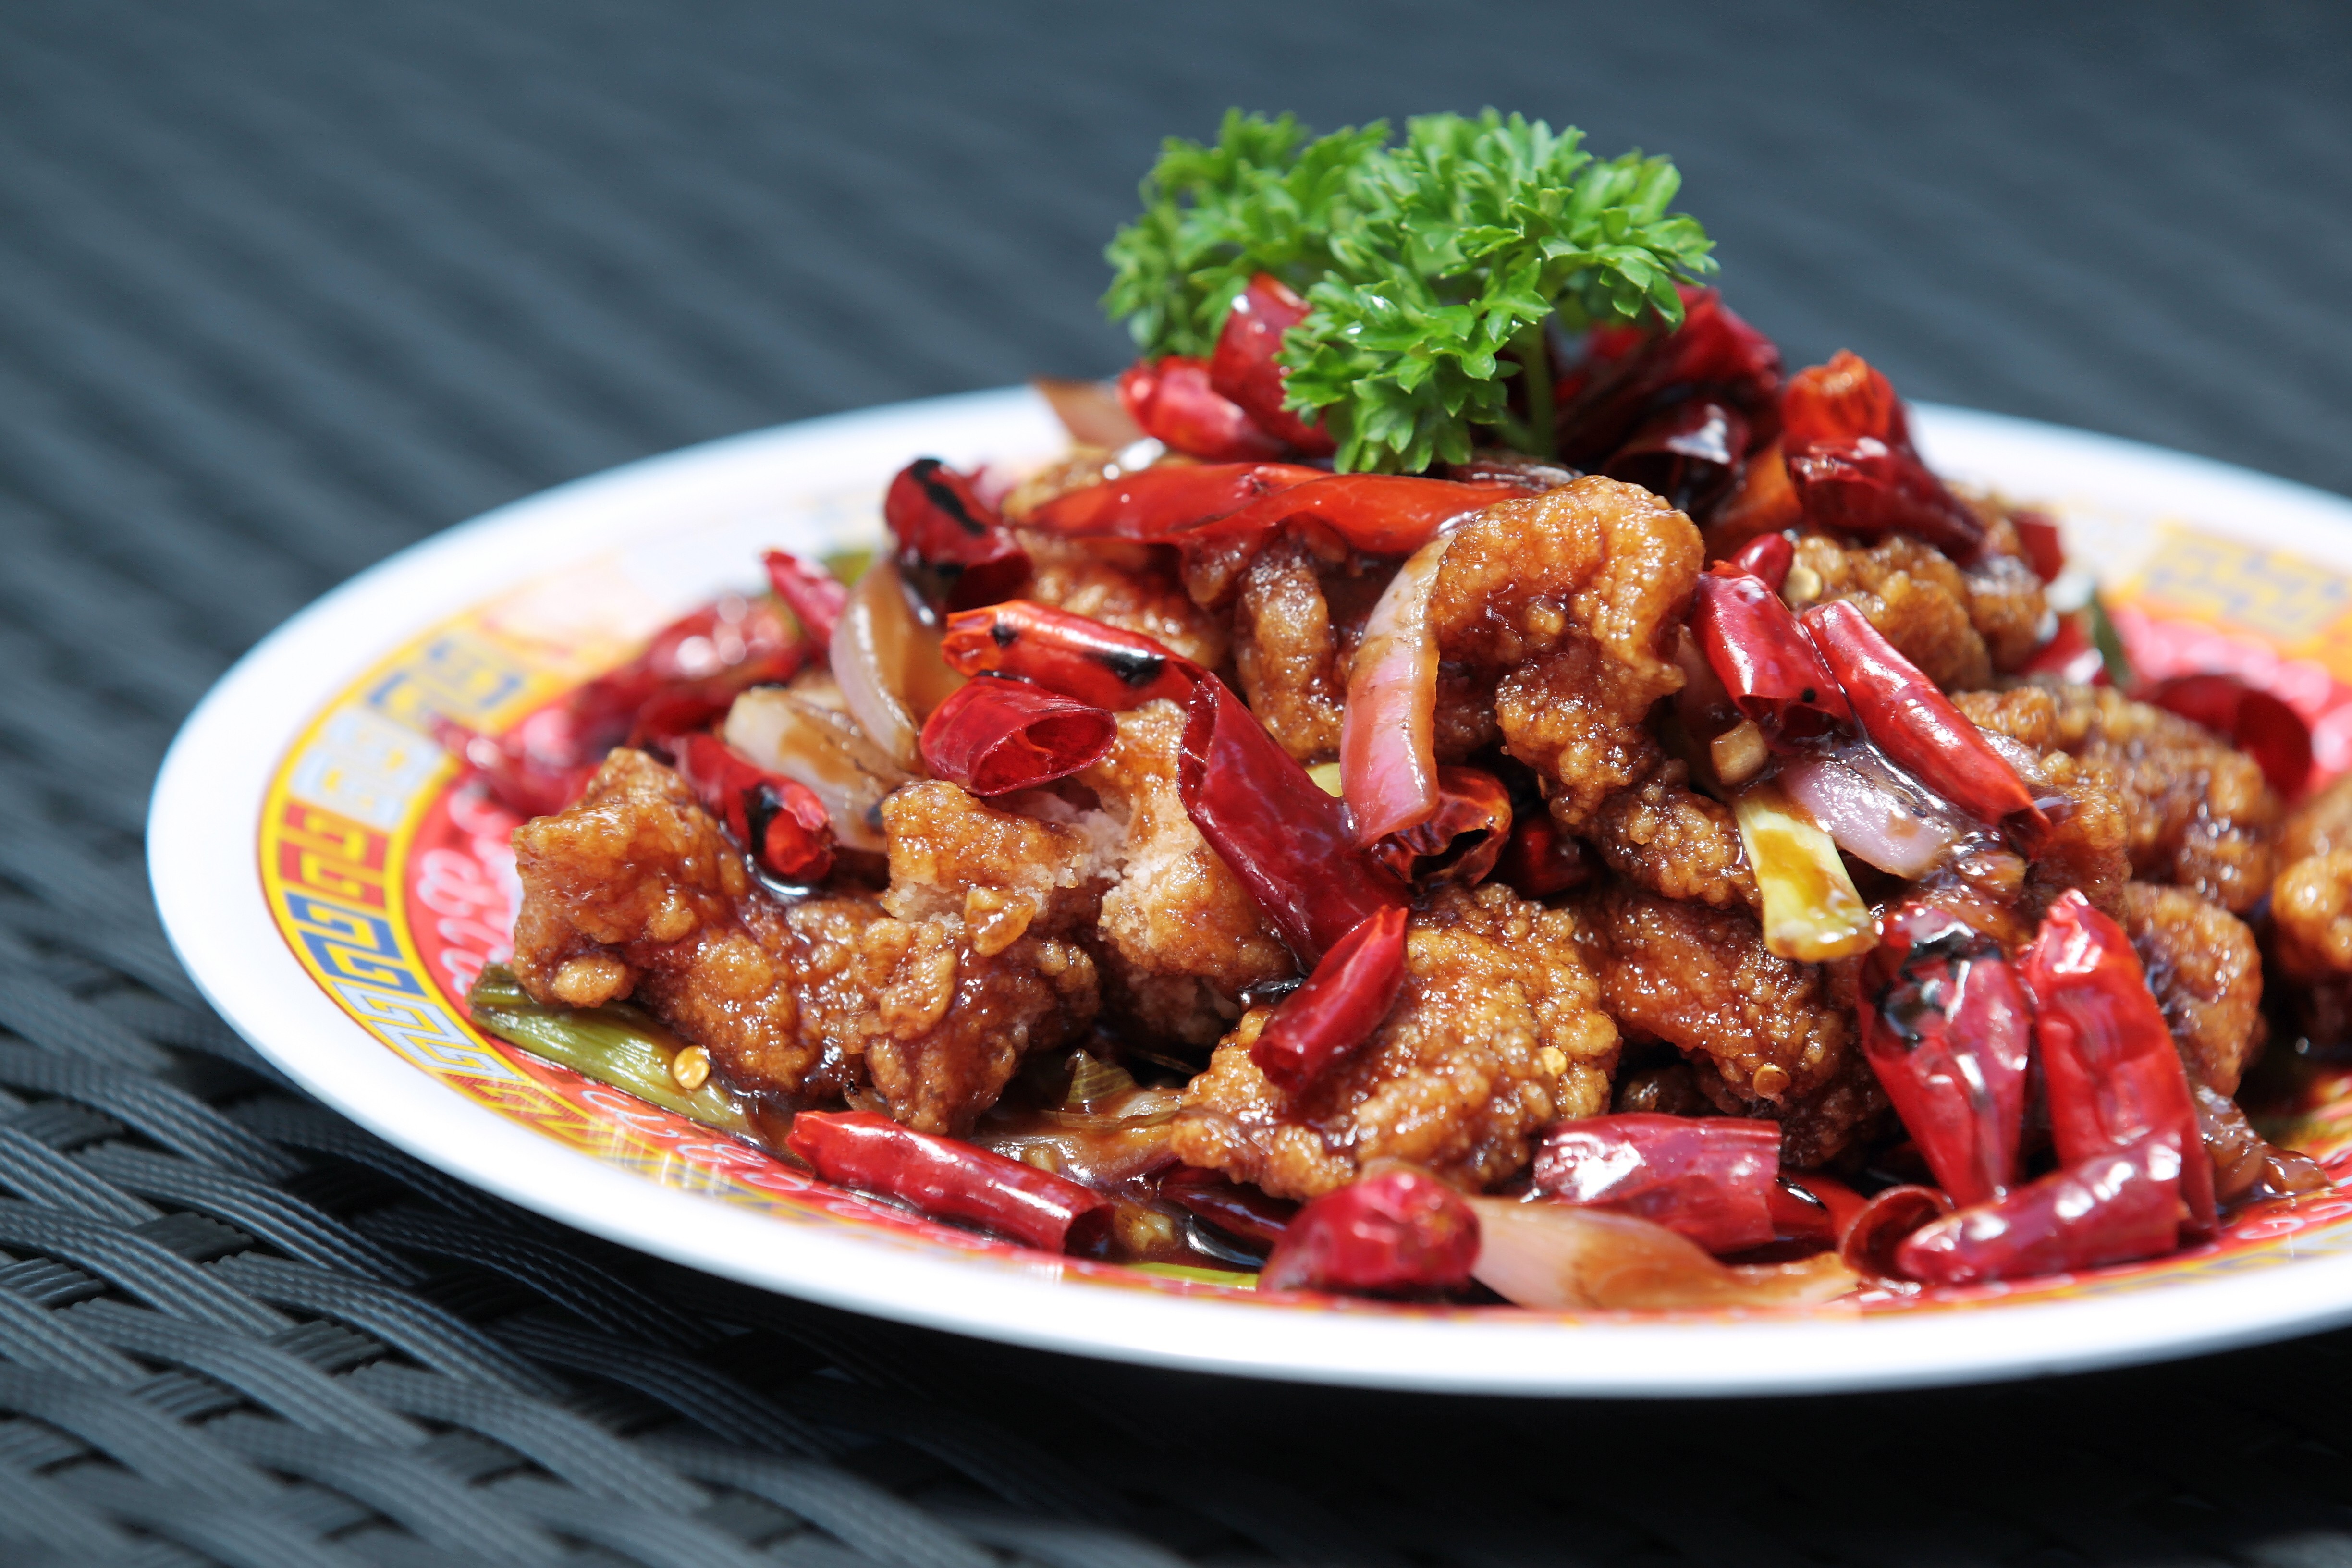 The dispute over who created General Tso’s chicken forms the basis for a documentary called The Search for General Tso’s Chicken, that premiered at the 2014 Tribeca Film Festival. Photo: handout